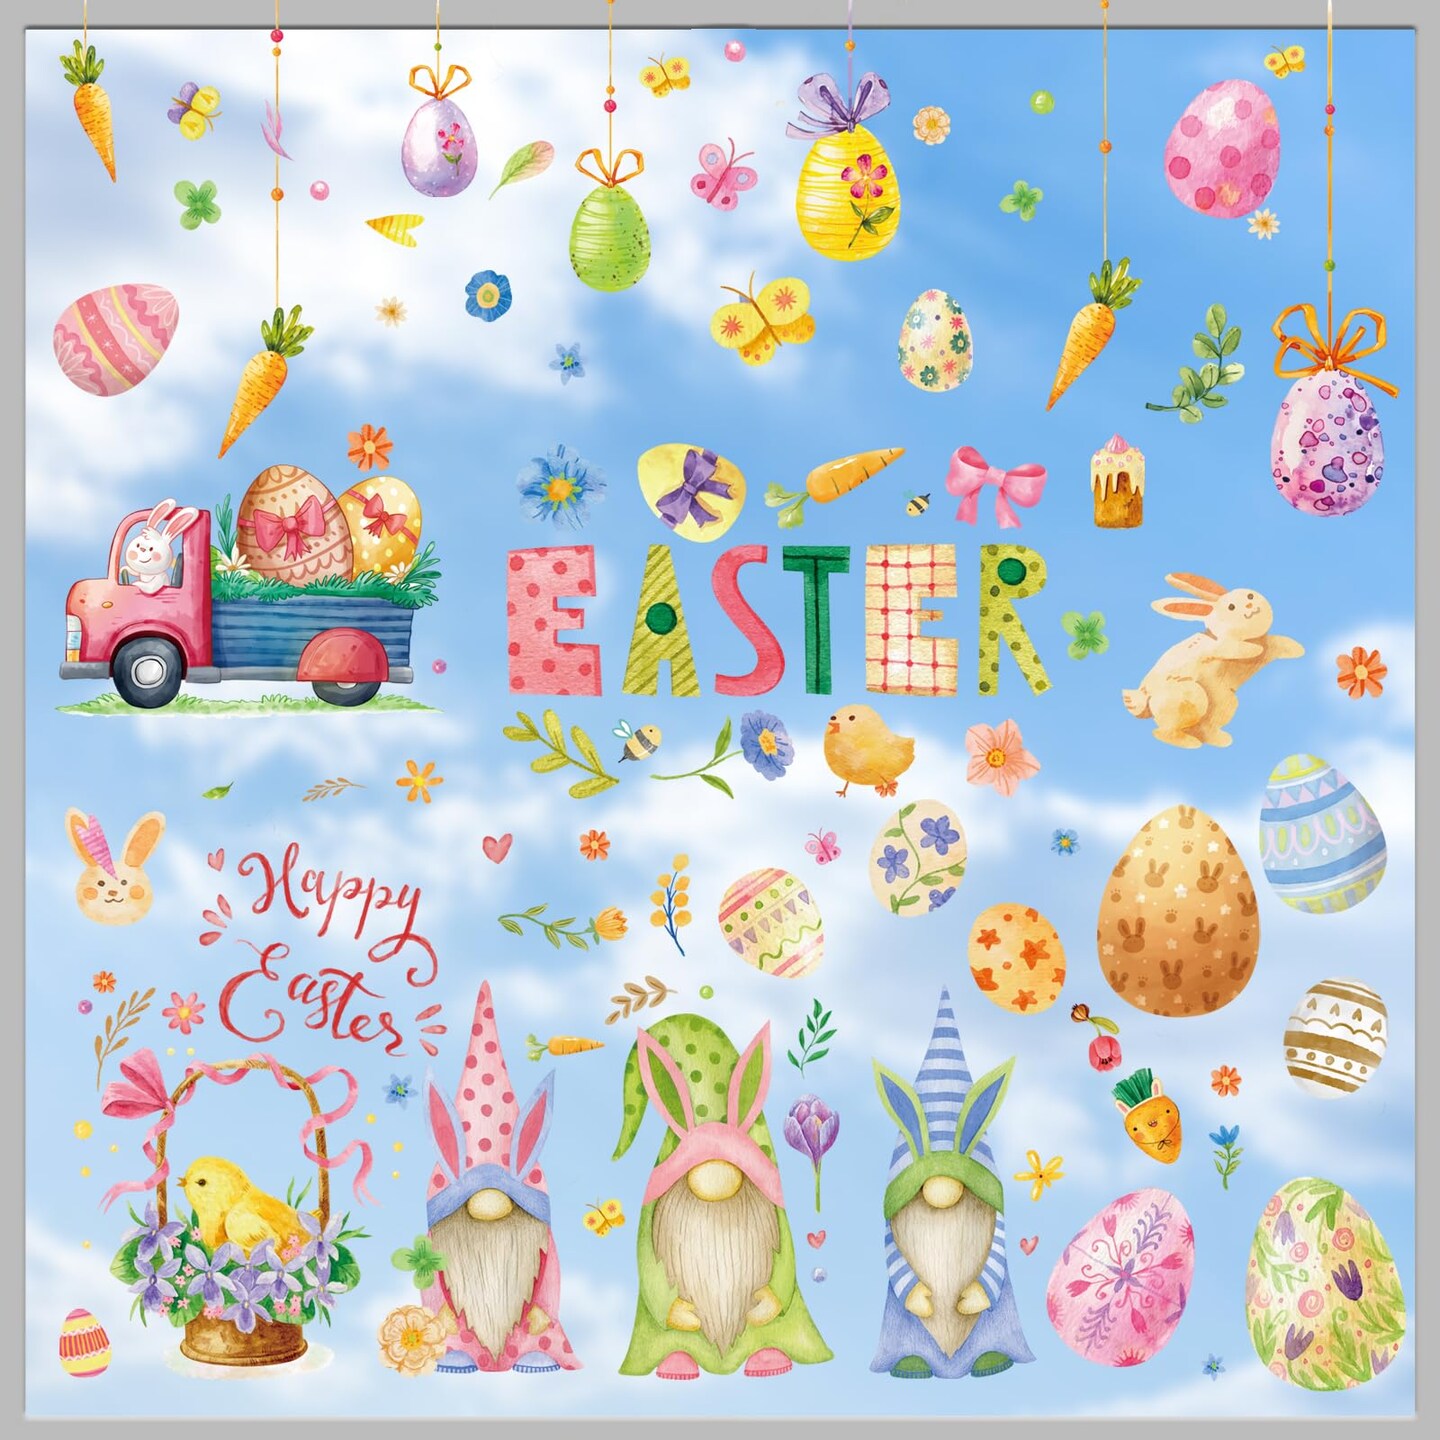 Easter Decorations Window Clings Decals Decor, 9 Sheets Large Easter Eggs Flowers Bunny Party Supplies Gifts, Double Sided Spring Window Clings Decorations for Kids School Home Office